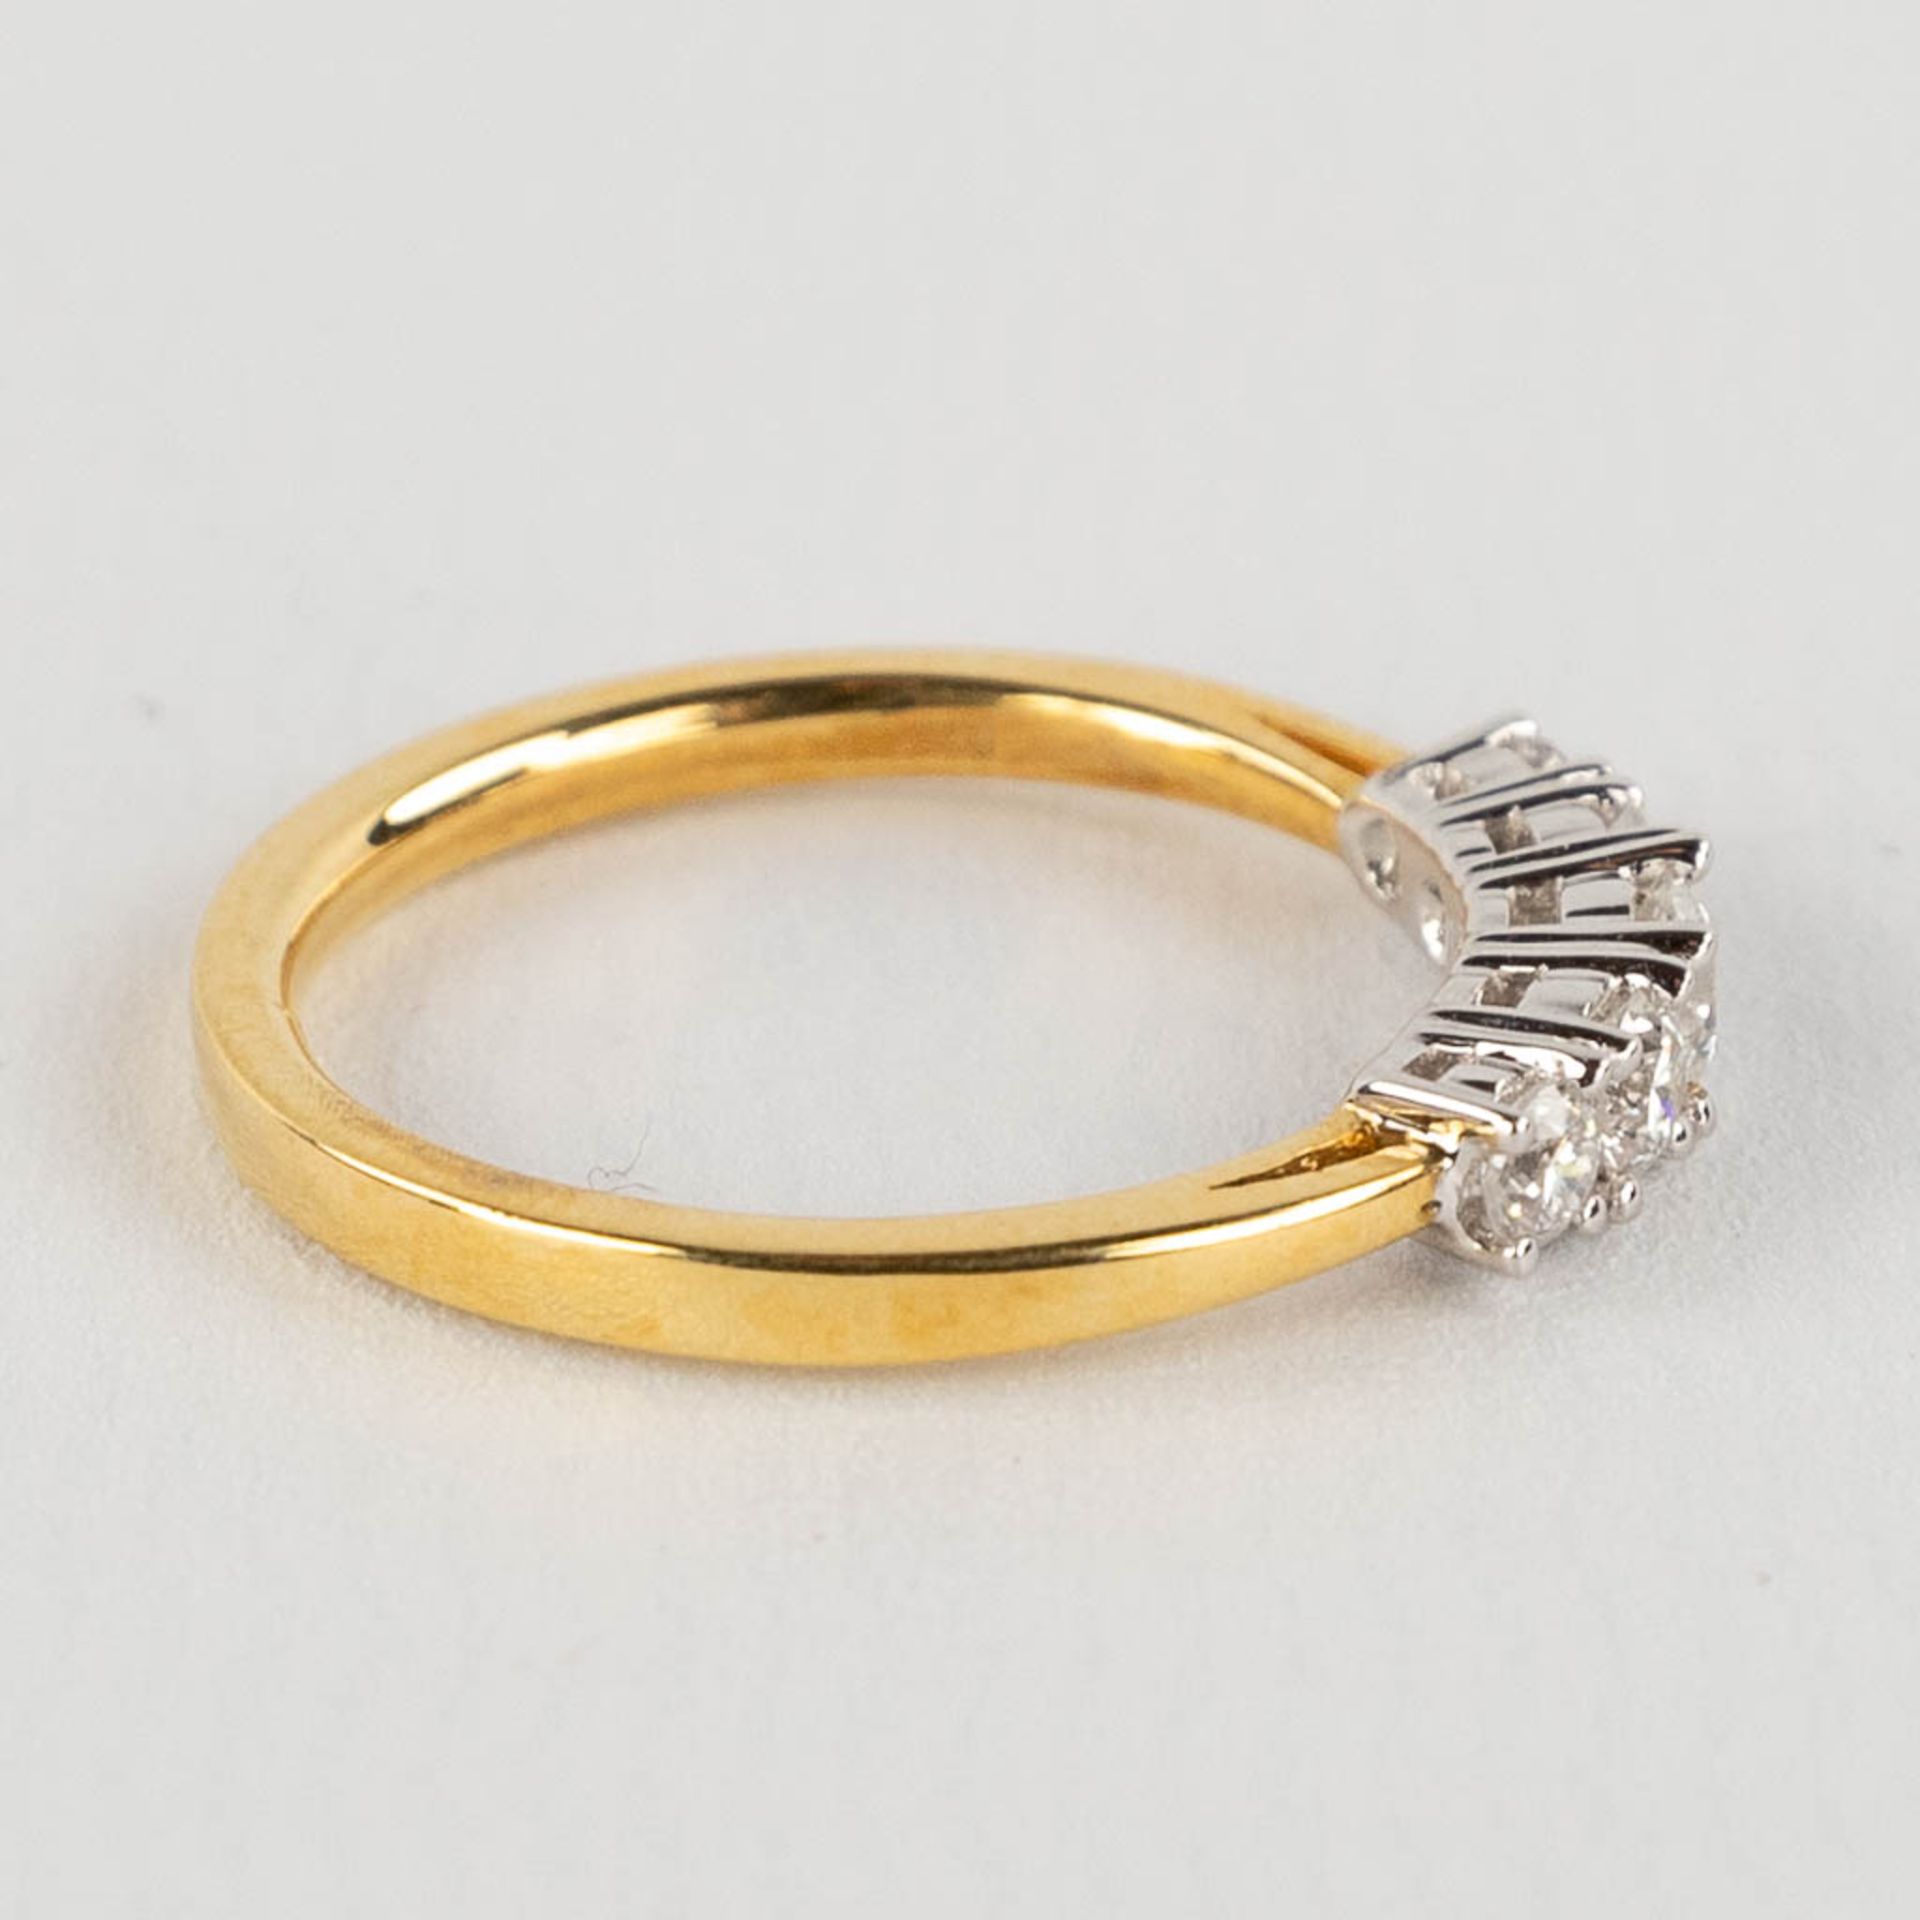 A ring, 18kt yellow and white gold with 5 diamonds, appr. 0,52ct. Ring size 54. - Image 7 of 11